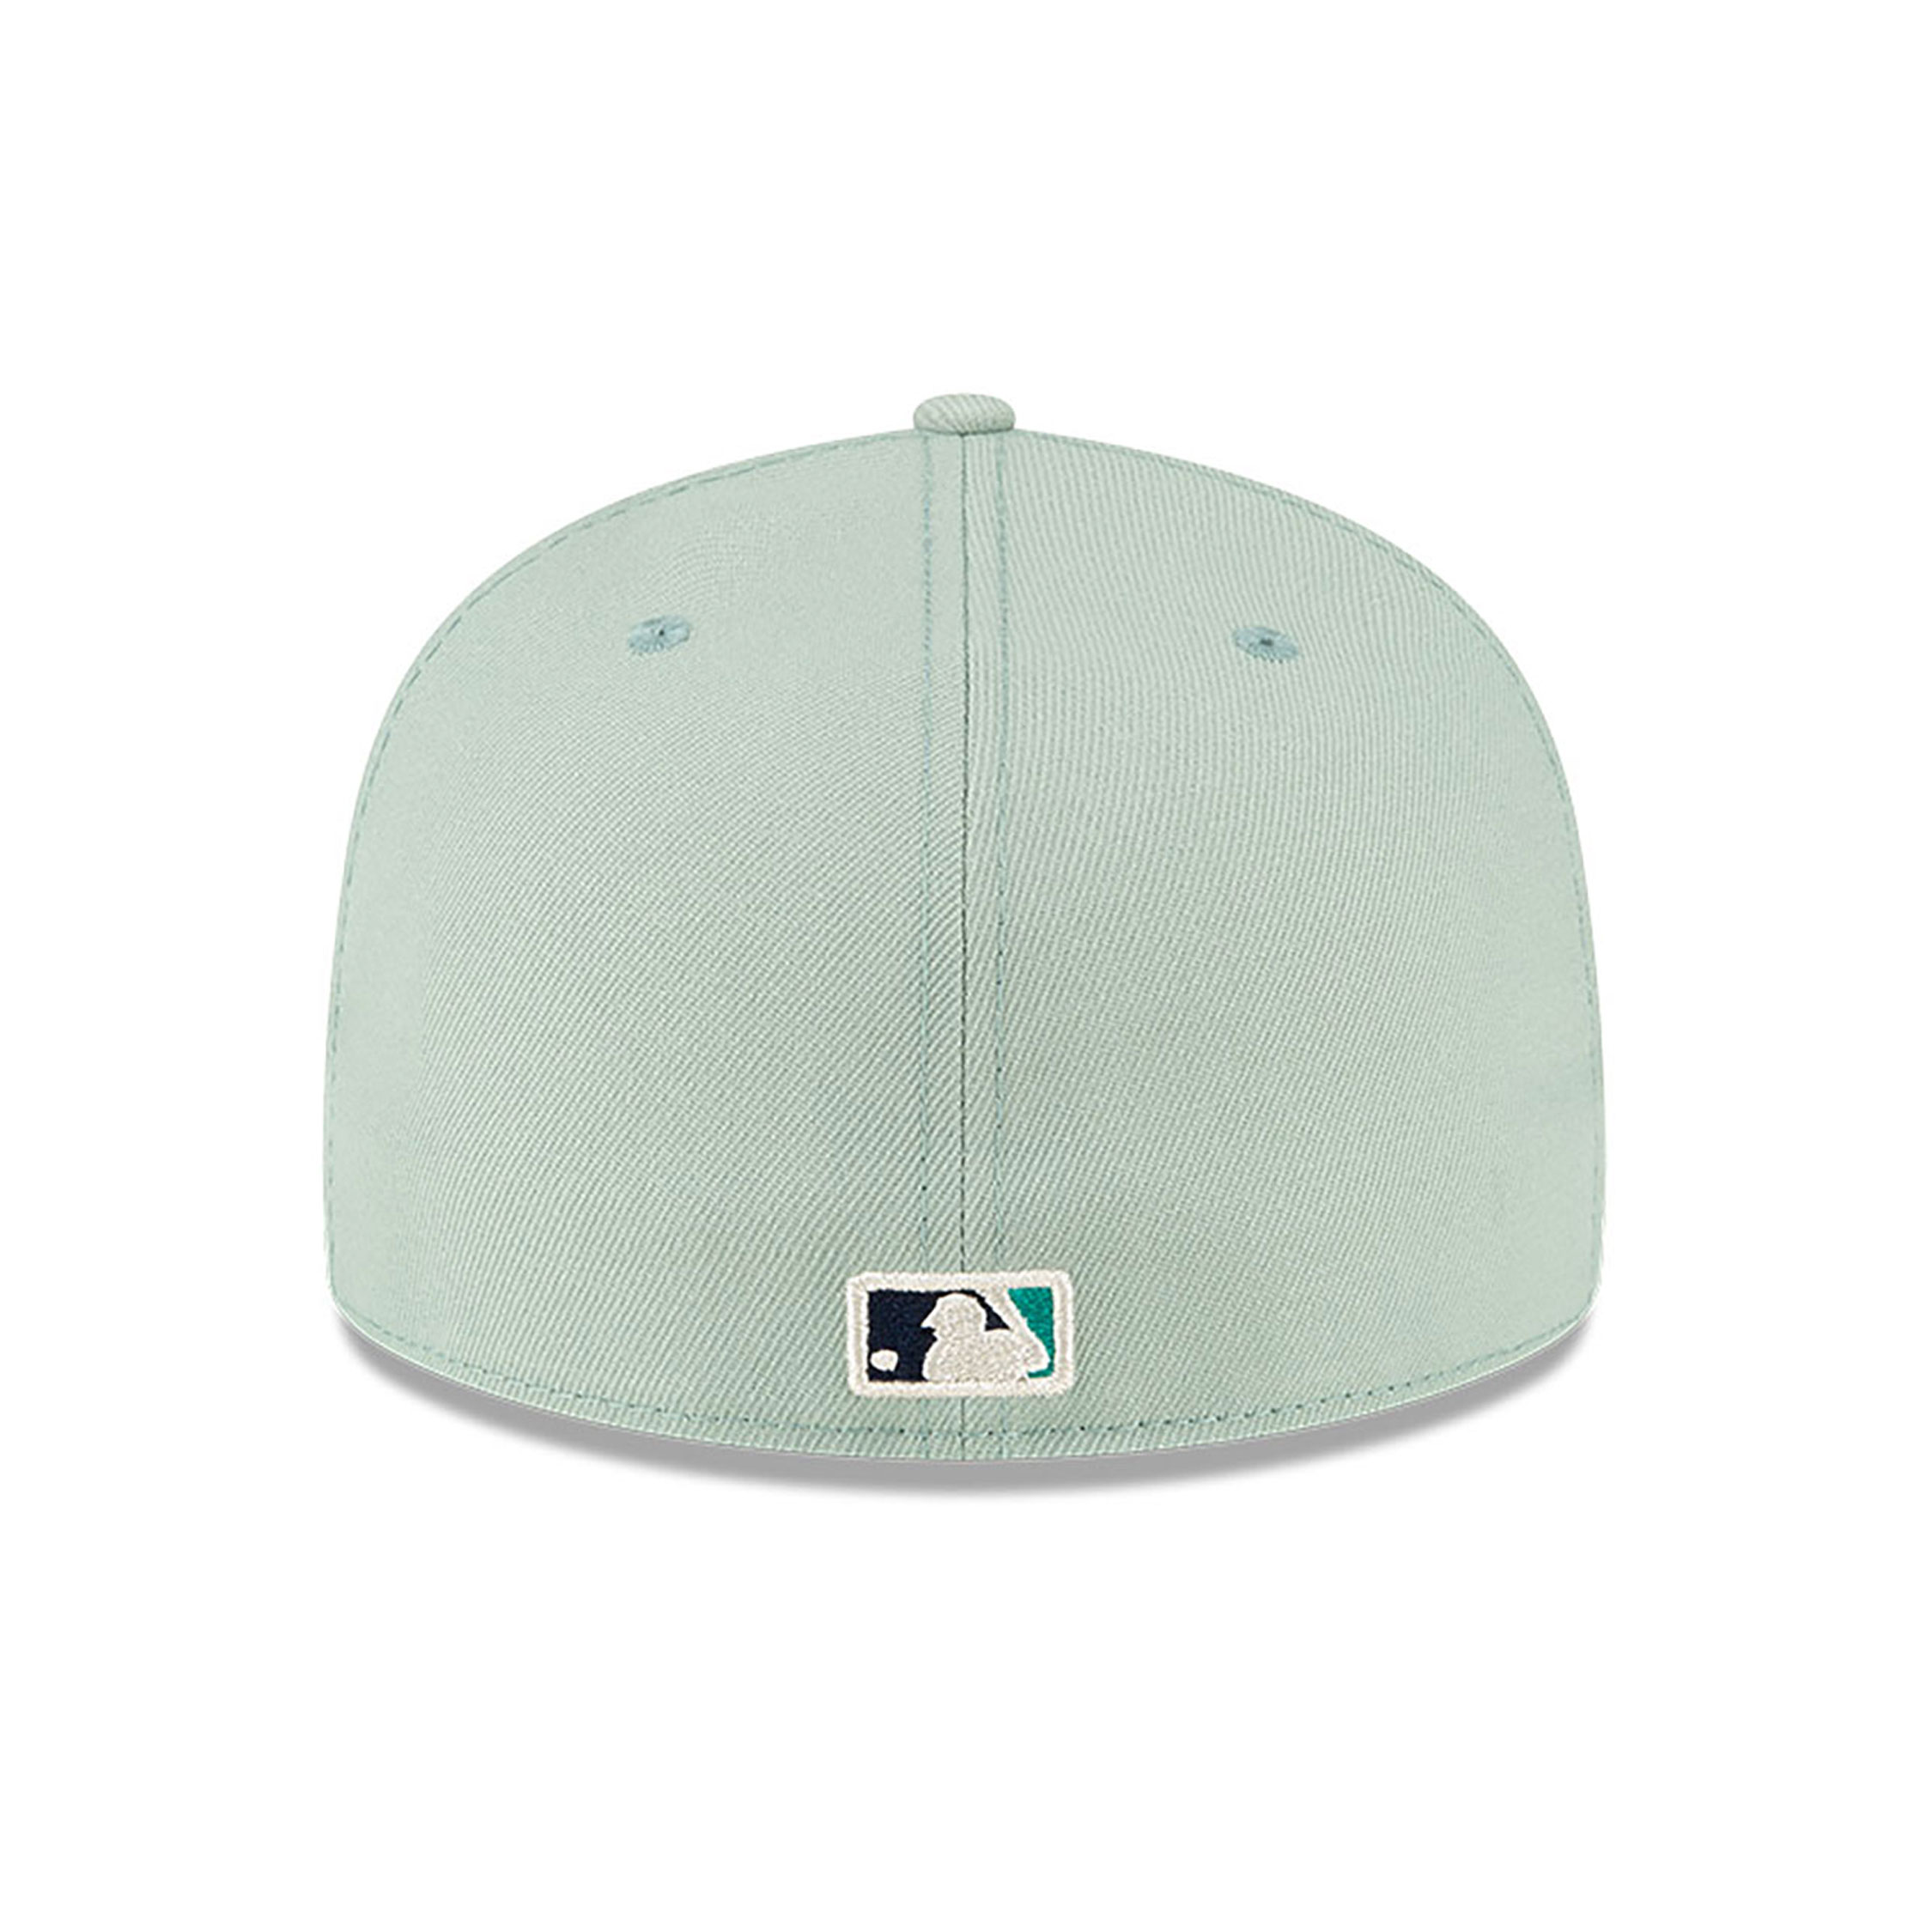 Detroit Tigers MLB All Star Game Pastel Green 59FIFTY Fitted Cap